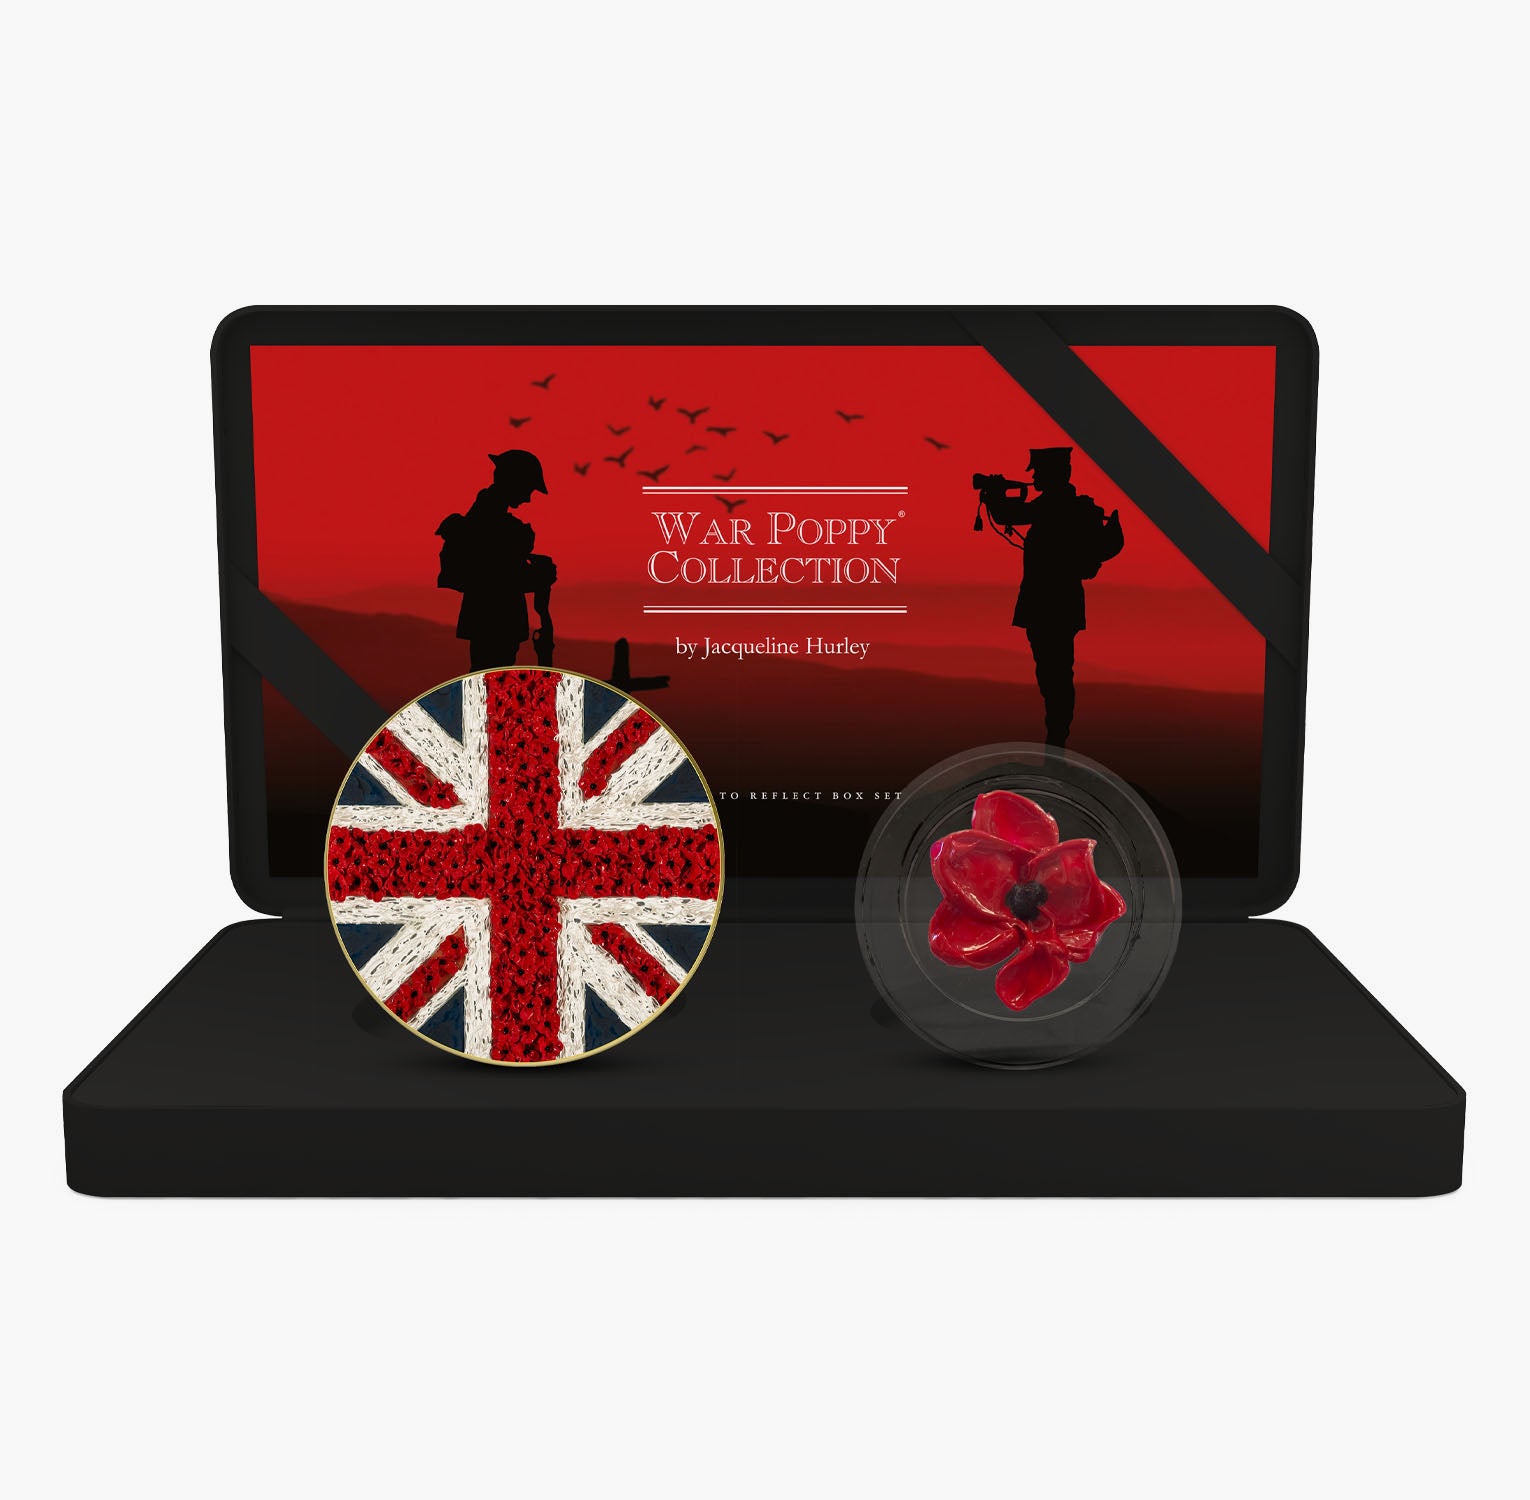 The Jacqueline Hurley War Poppy a Time to Reflect Box Set